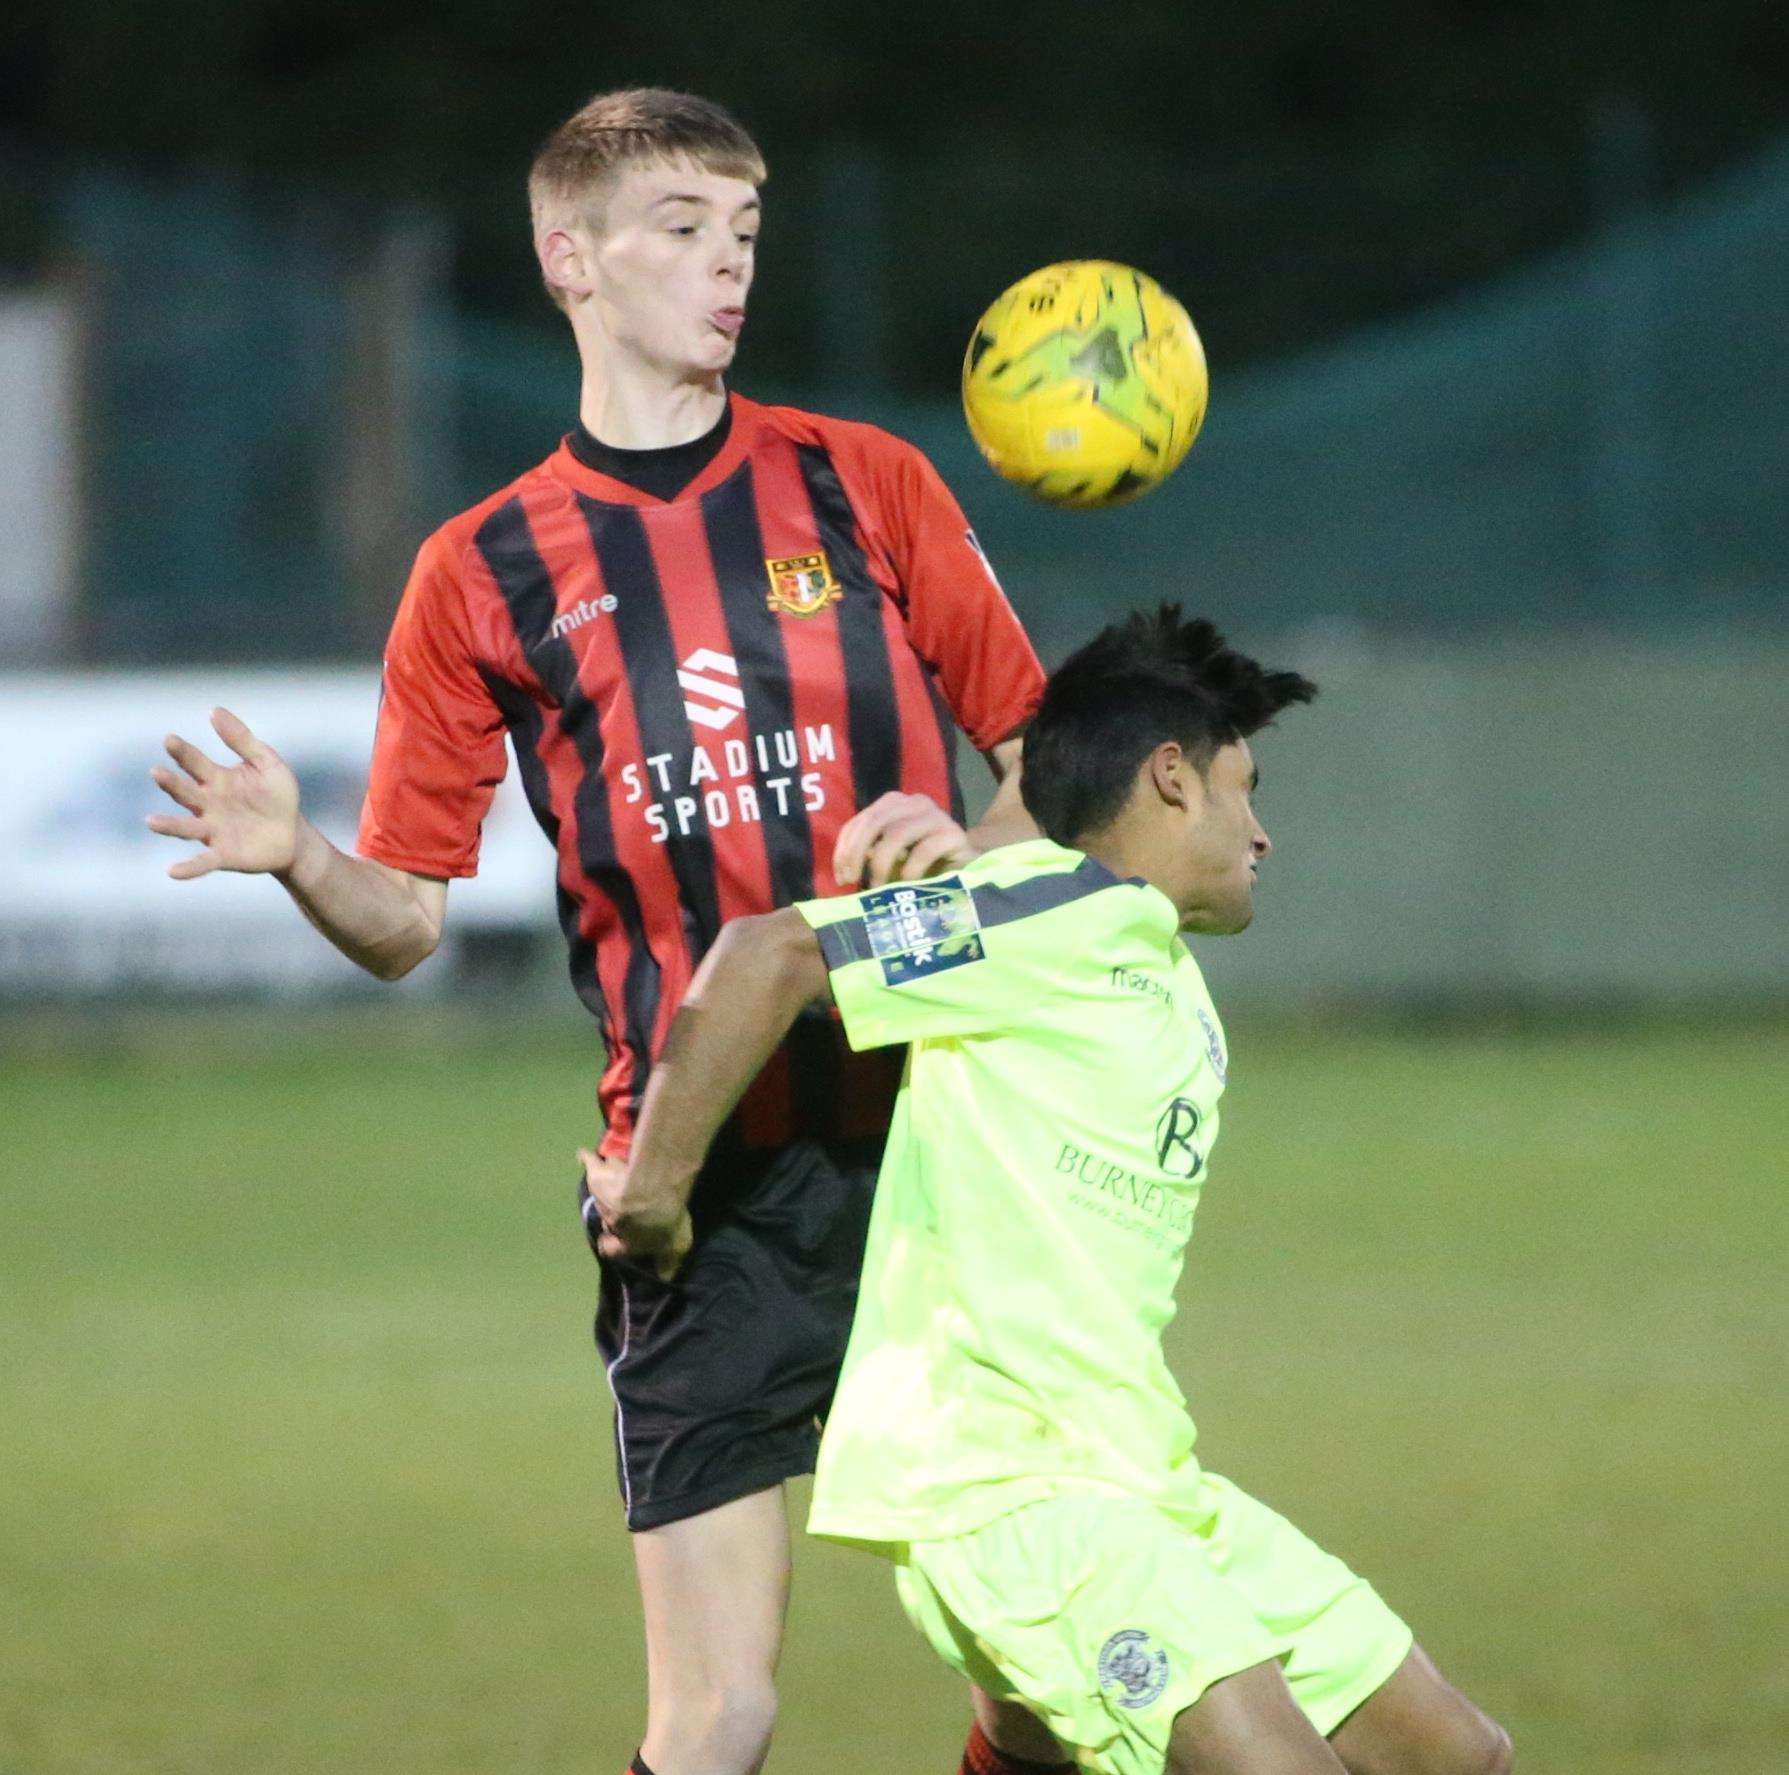 Lex Allan is staying at Sittingbourne Picture: John Westhrop